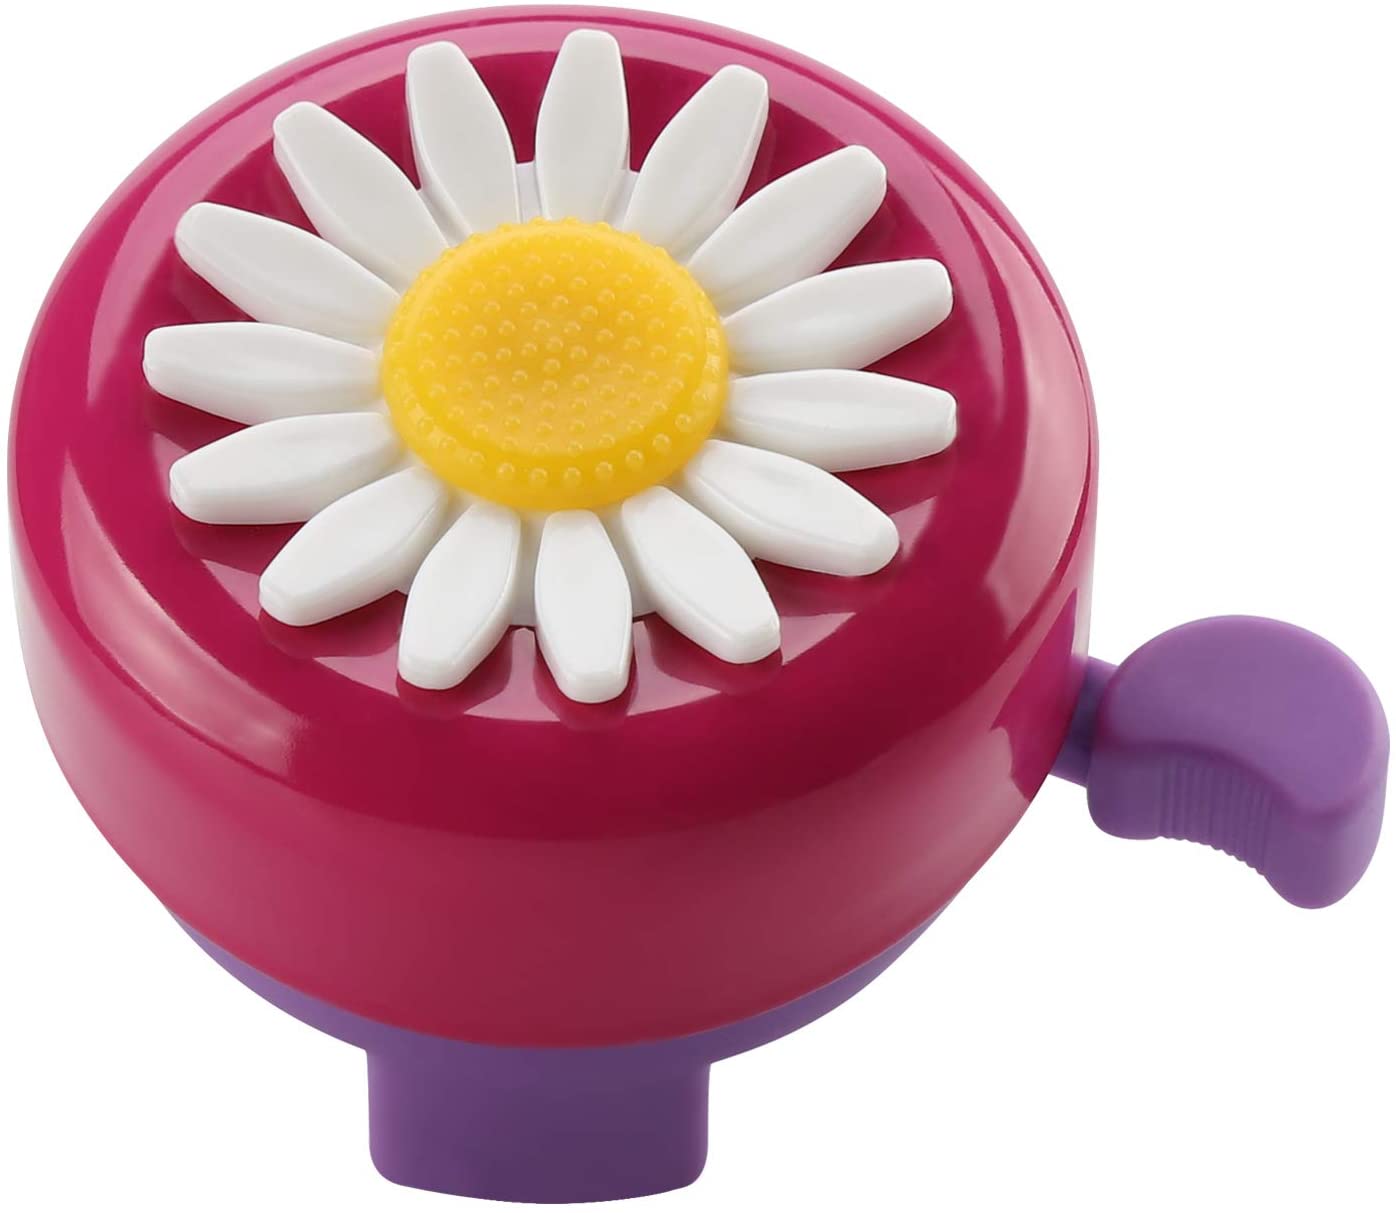 SIKAF MALL Kid’s Flower Bicycle Bell